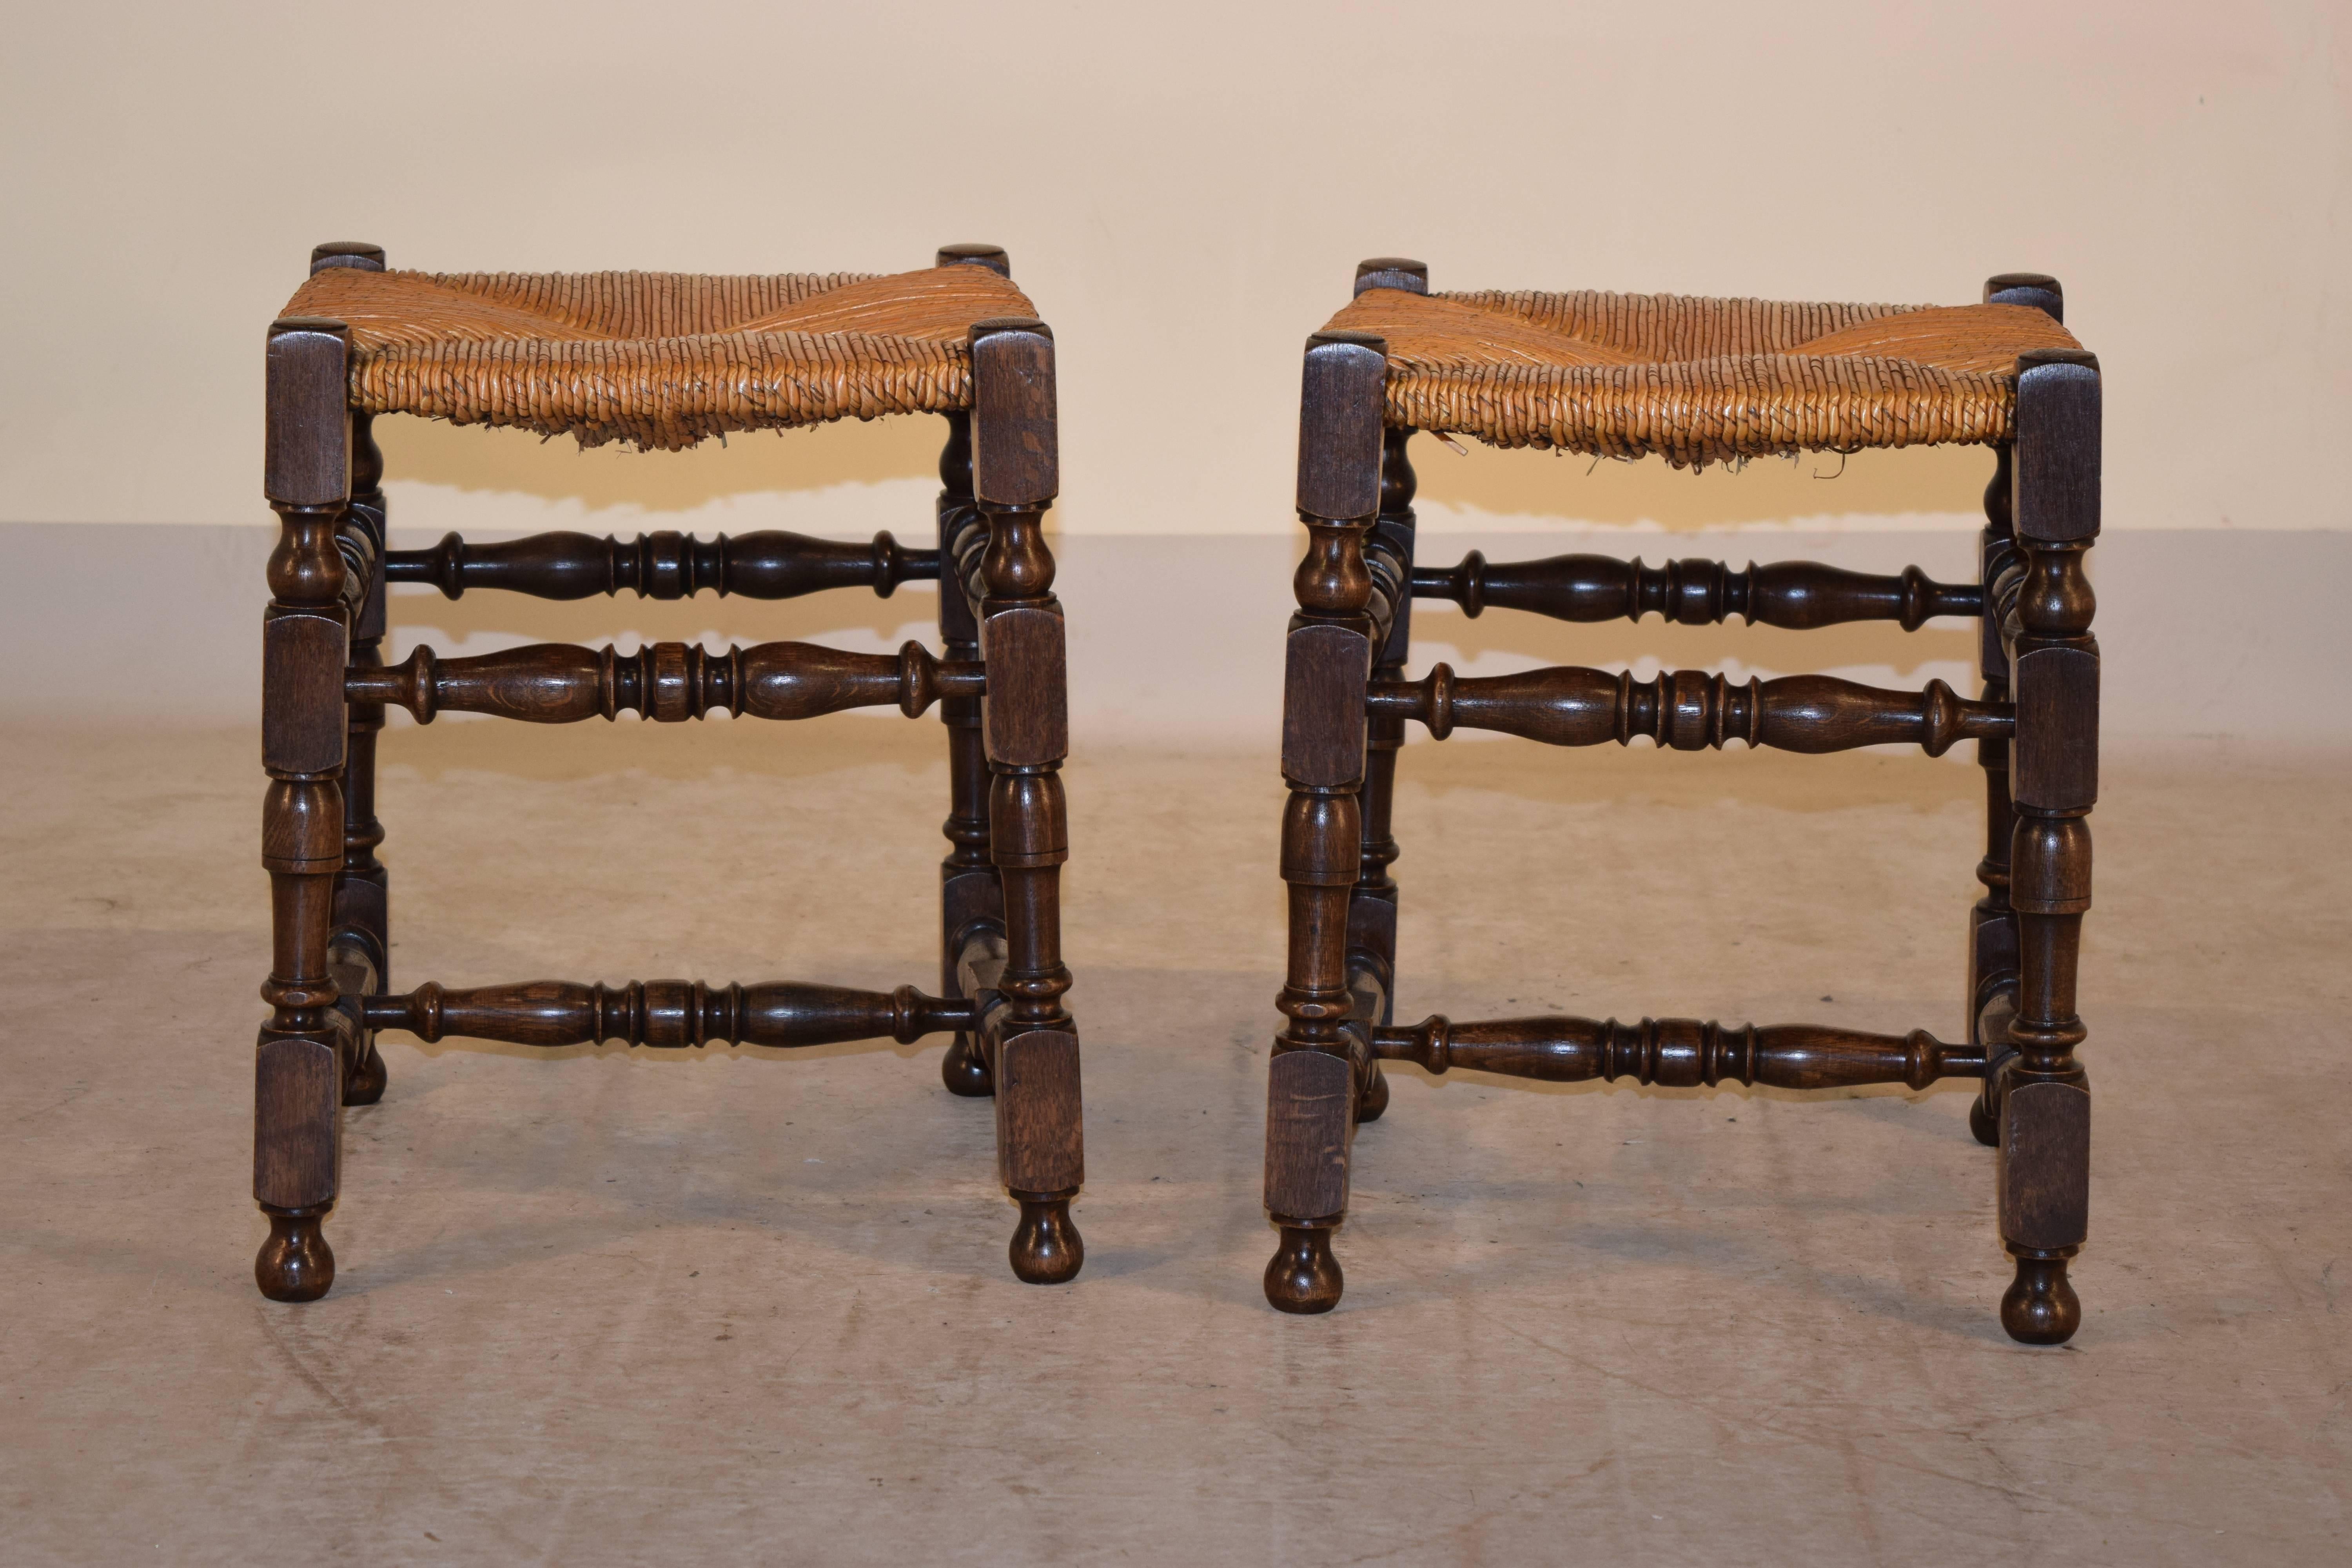 Pair of late 19th century French stools made from oak with rush seats and hand-turned legs and stretchers.